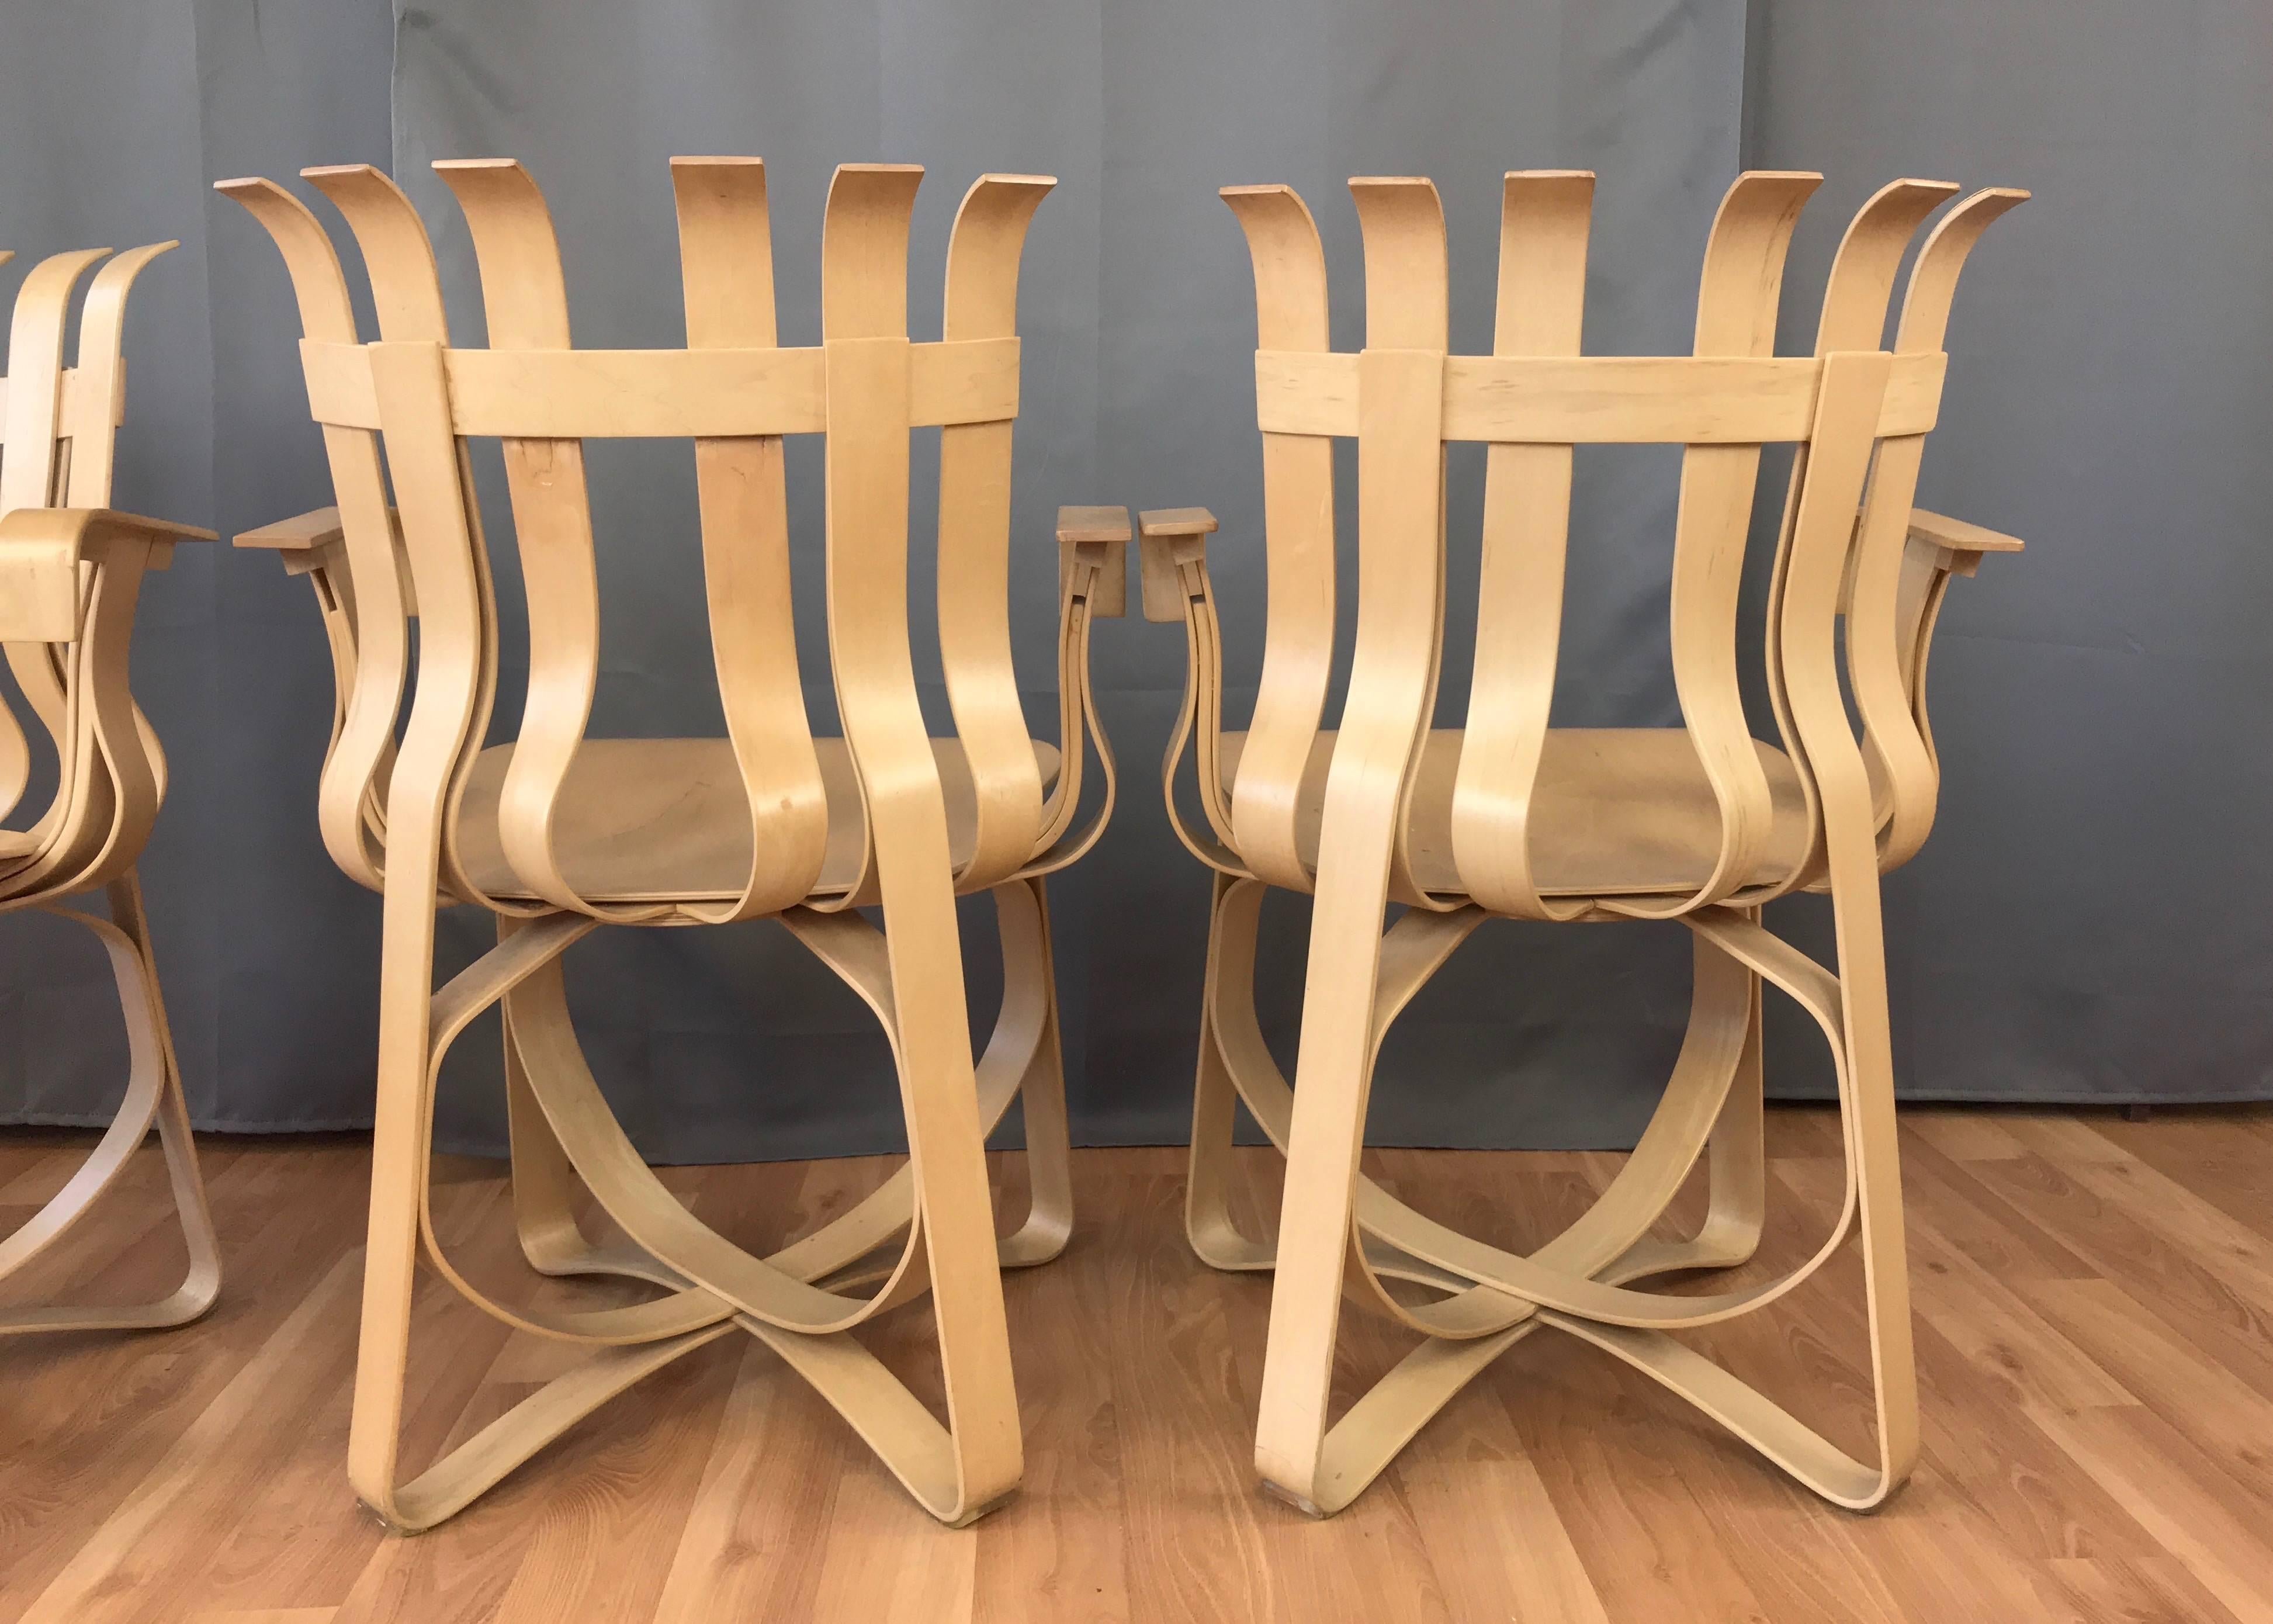 Late 19th Century Frank Gehry for Knoll Hat Trick Chairs, Three Available